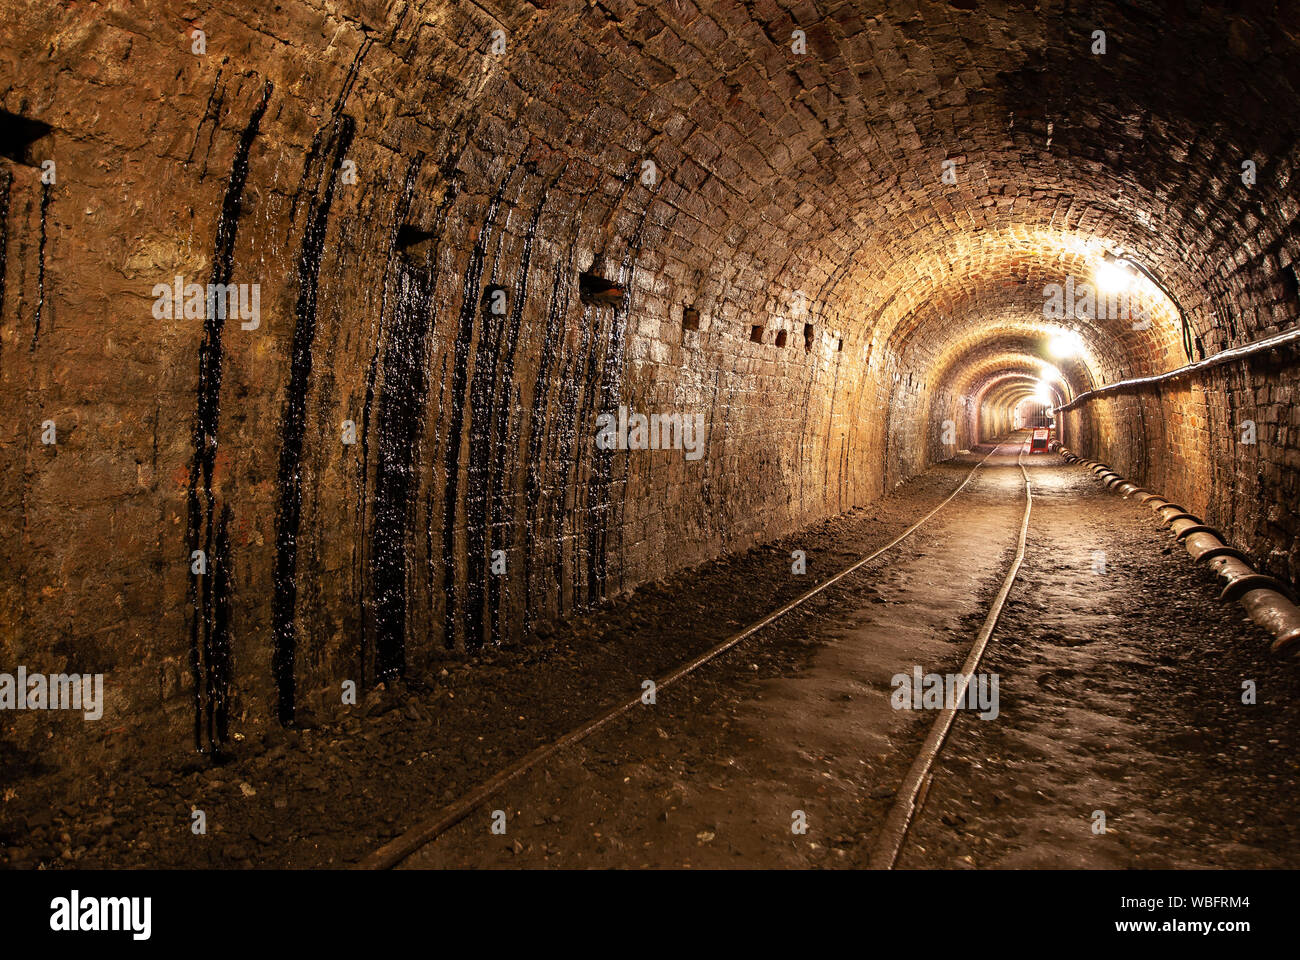 Inside view of a brick-lined tunnel with tar seeping down the walls and a narrow-gauge railway track at Coalport, Ironbridge Gorge, England. Stock Photo